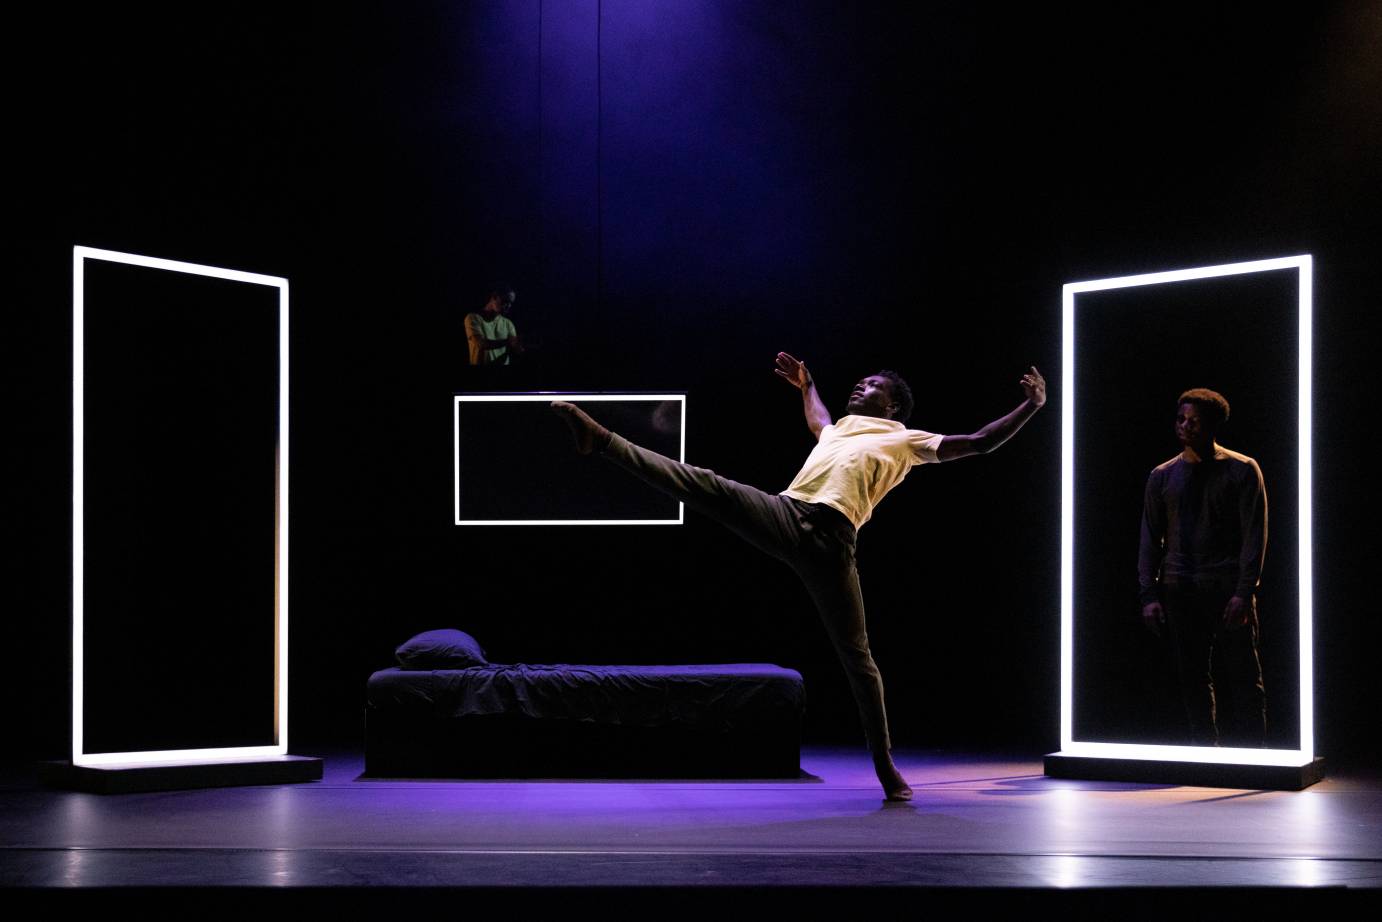 Felisberto, arms horizontal, leg extended forward in bedroom surrounded by three set pieces rimmed in white light